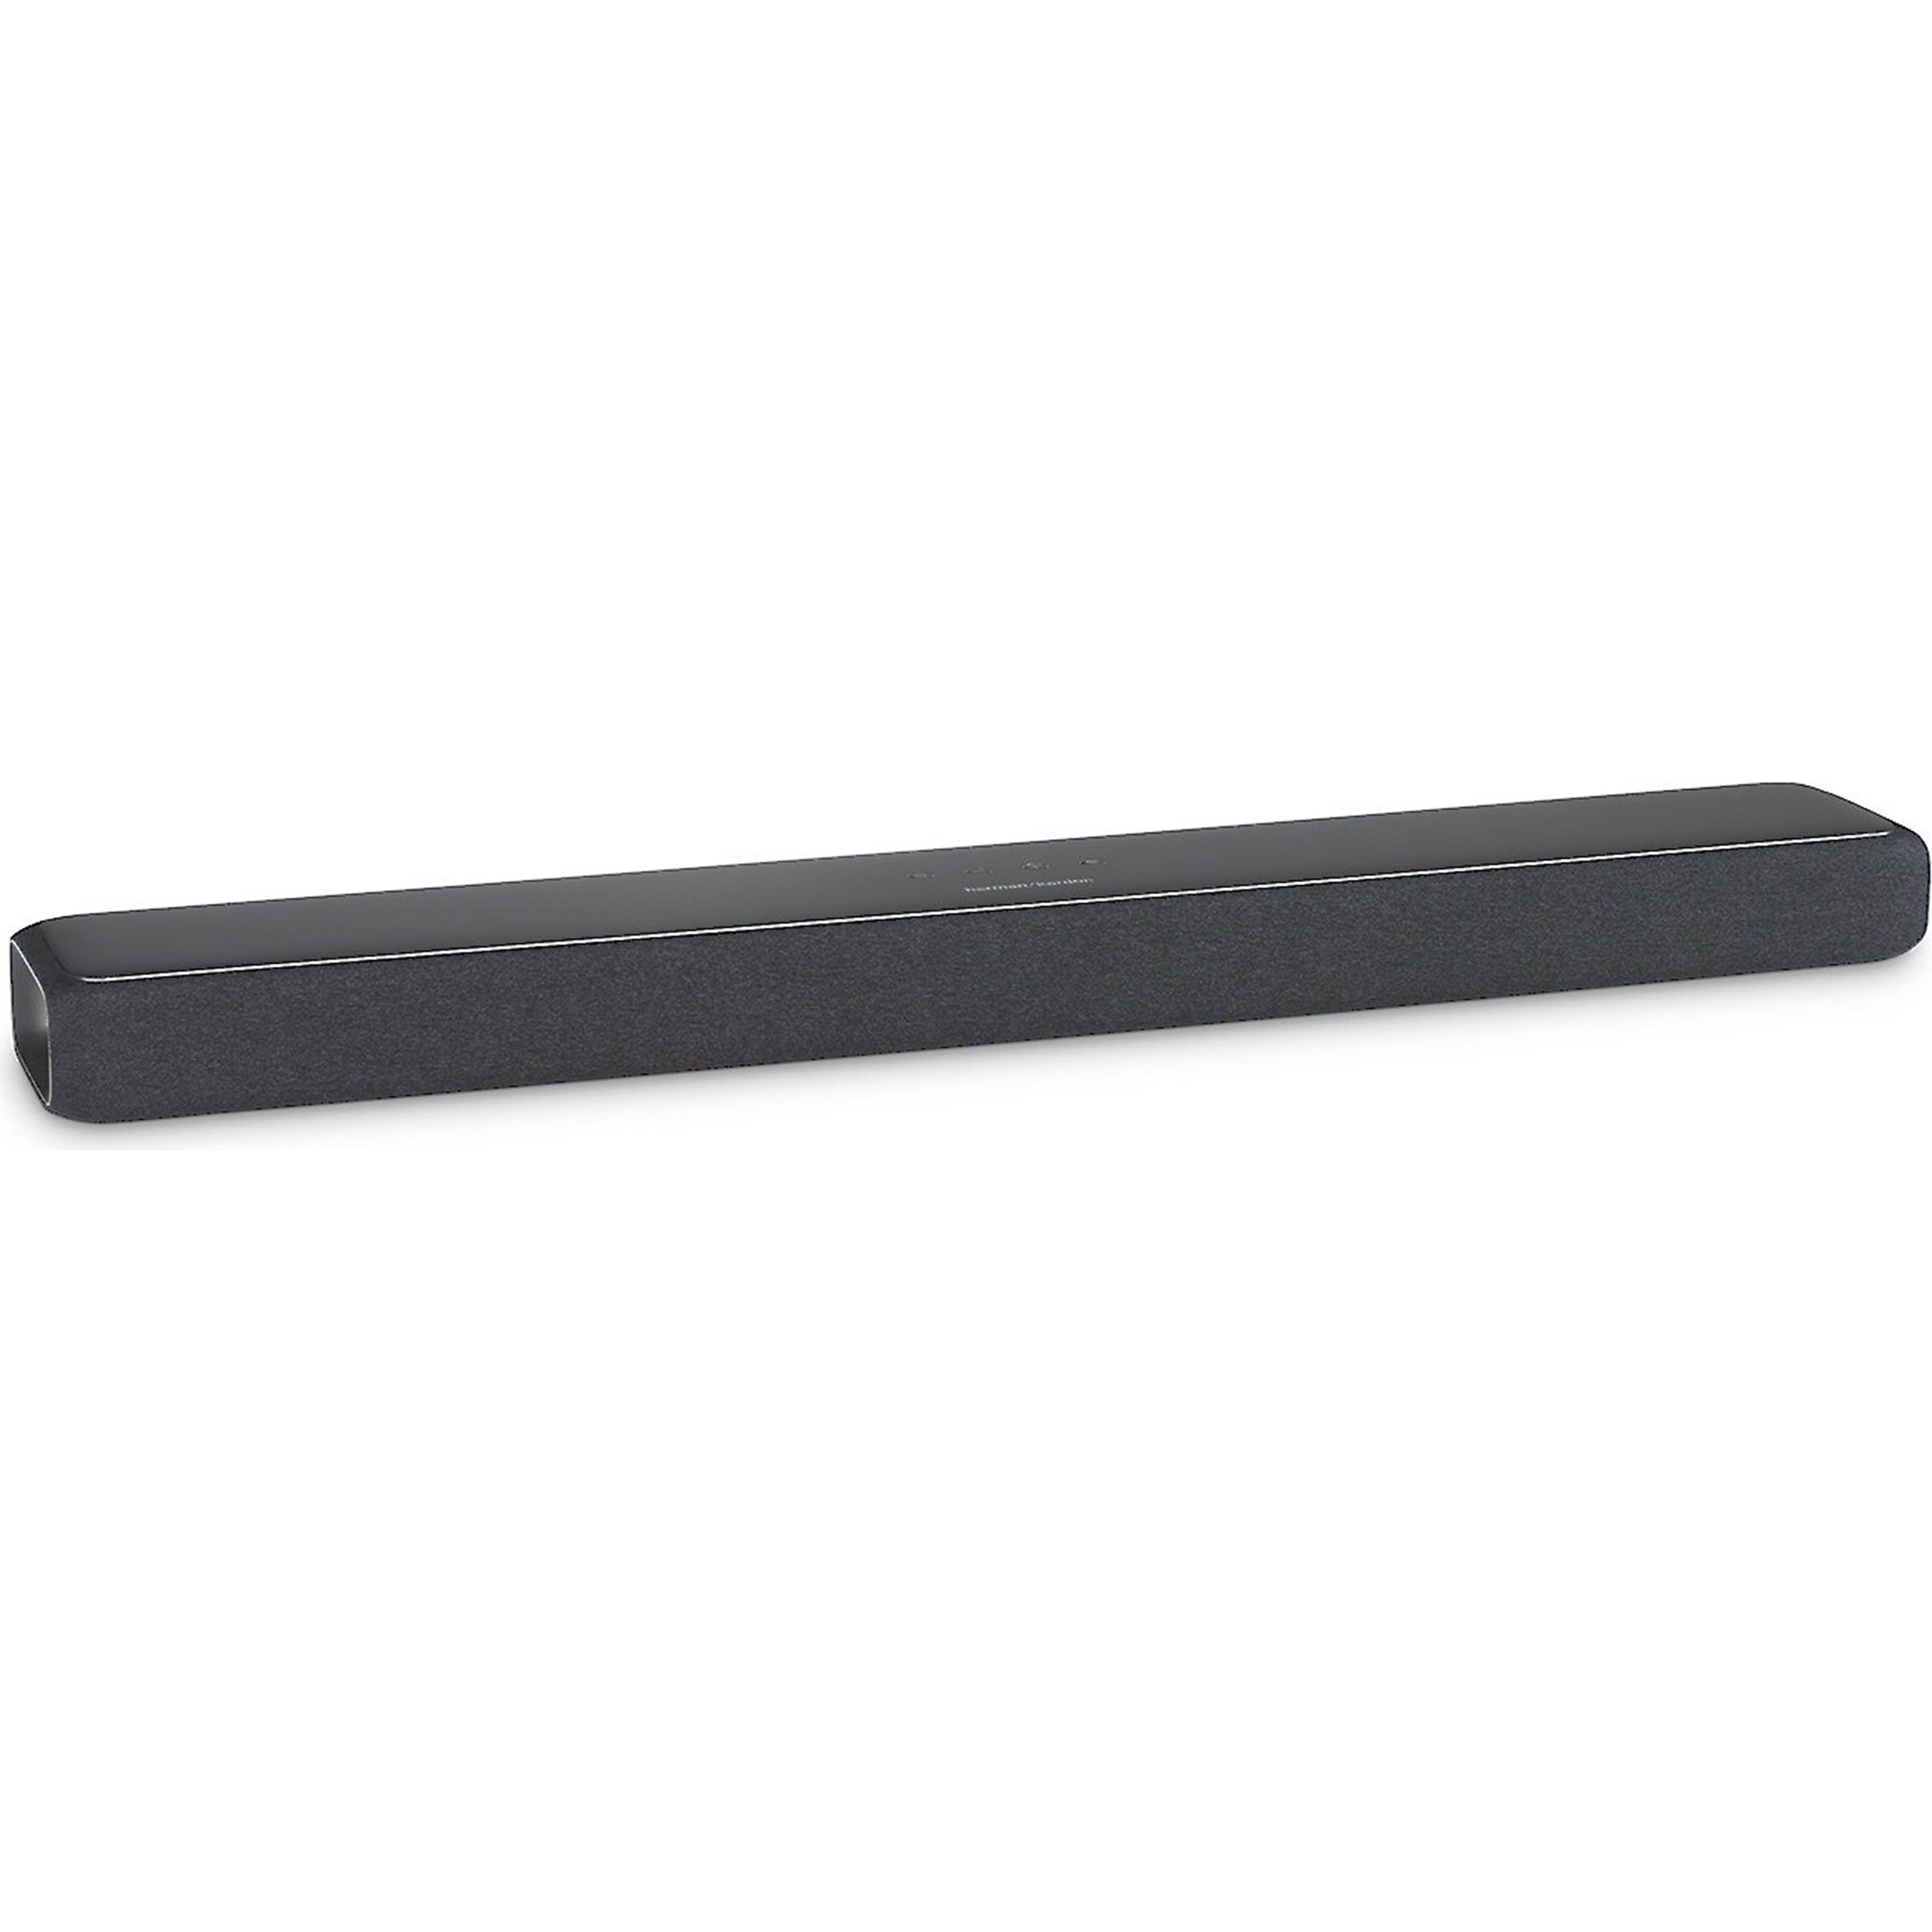 Harman / Kardon Enchant 800 Bluetooth Wi-Fi All-in-One Sound Bar - Refurbished Excellent - SCRATCHES ON REMOTE